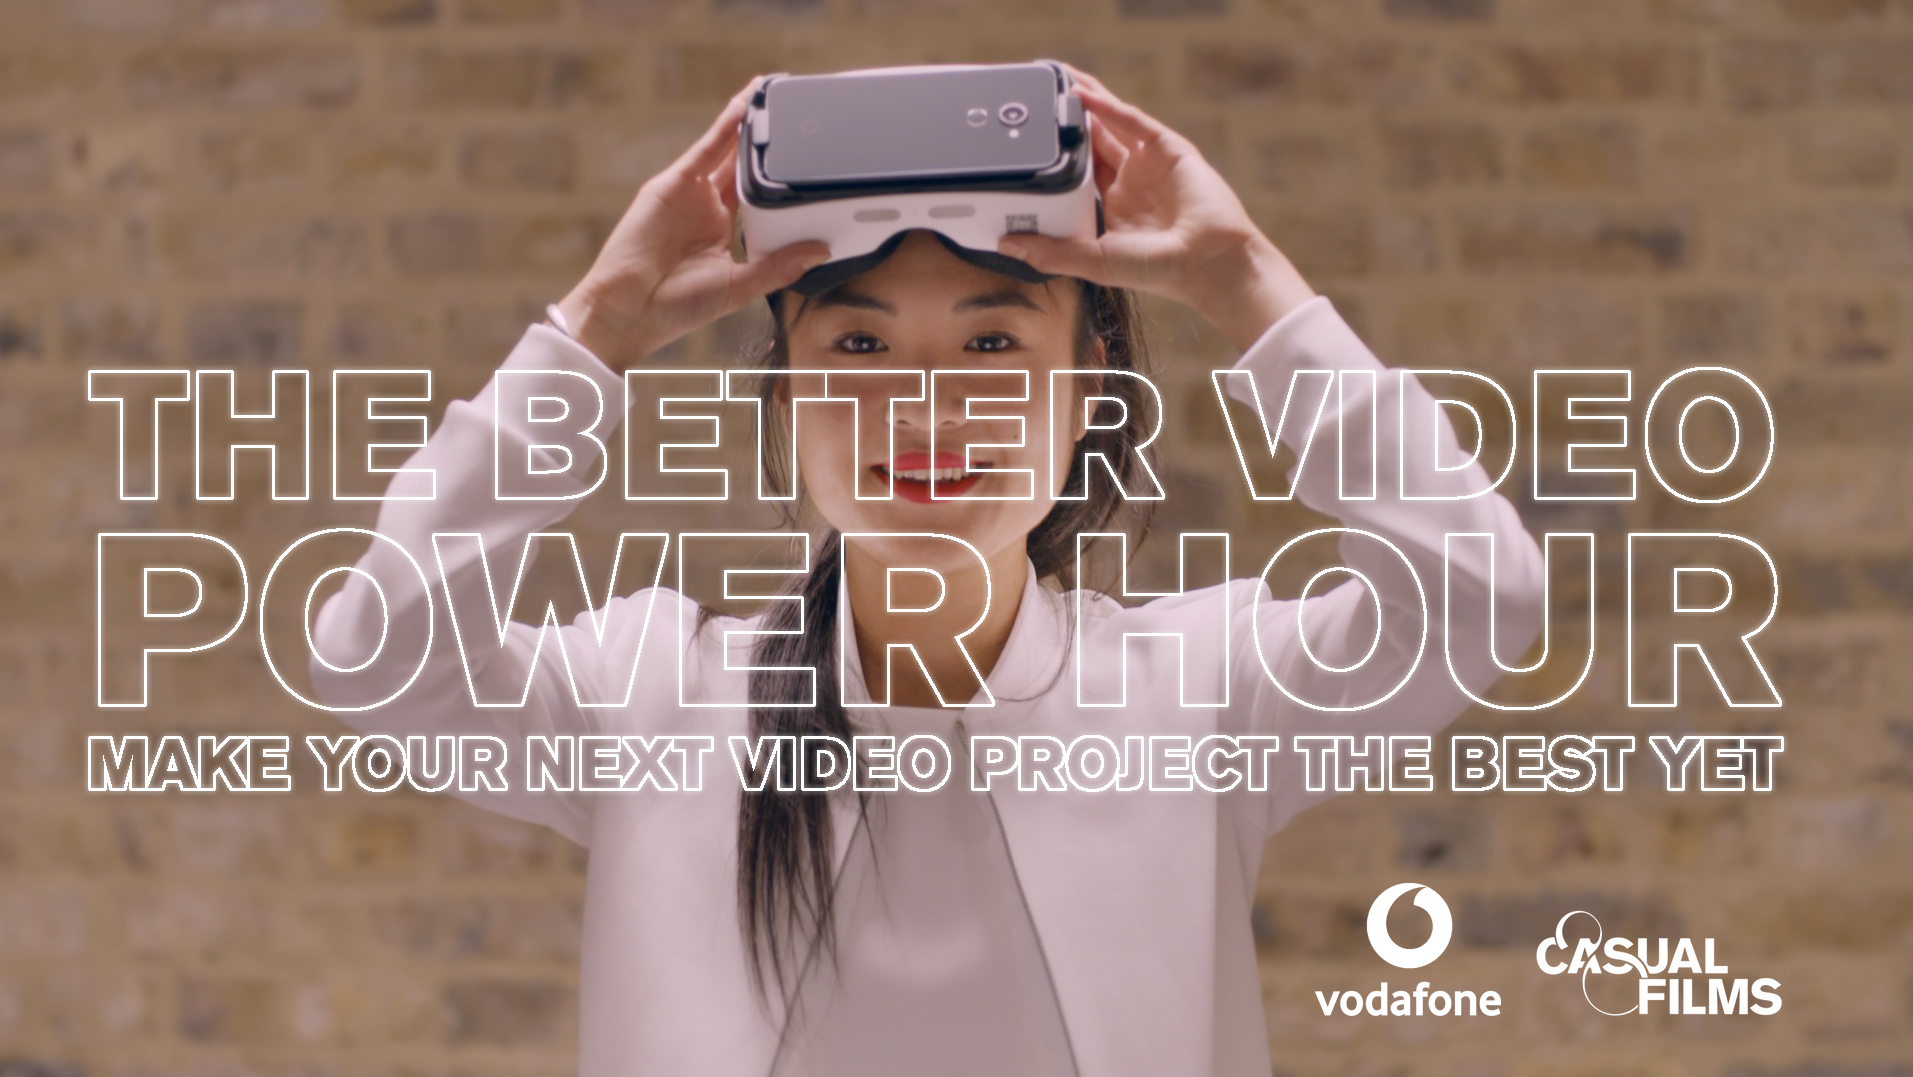 Vodafone Attract and Recruit Casual Films 2